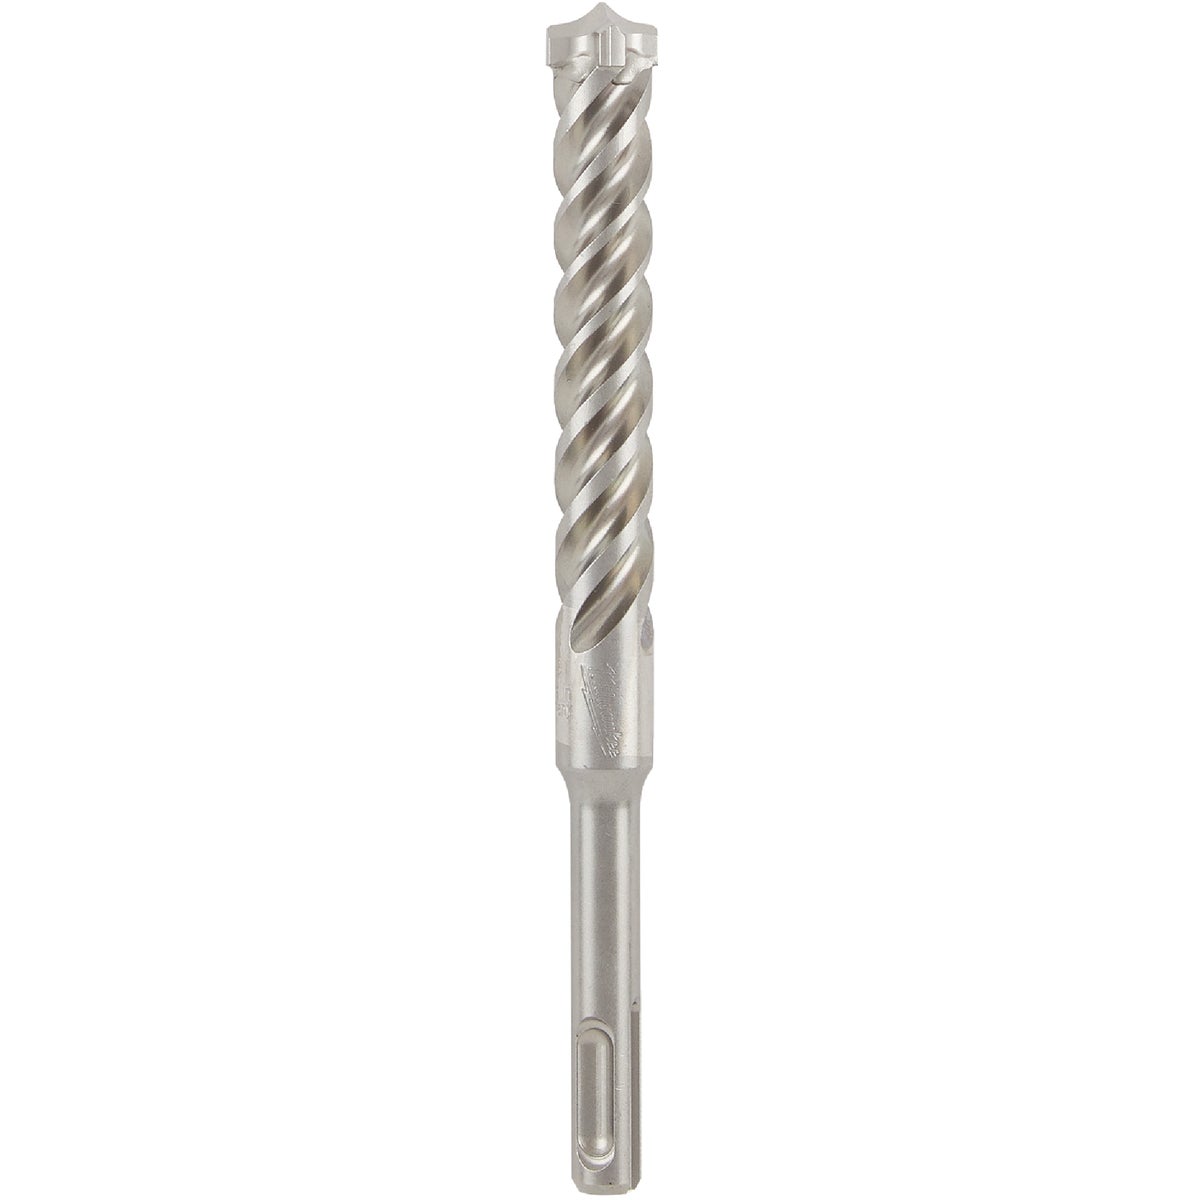 Milwaukee 5/8 In. x 8 In. SDS-PLUS 4-Cutter Rotary Hammer Drill Bit